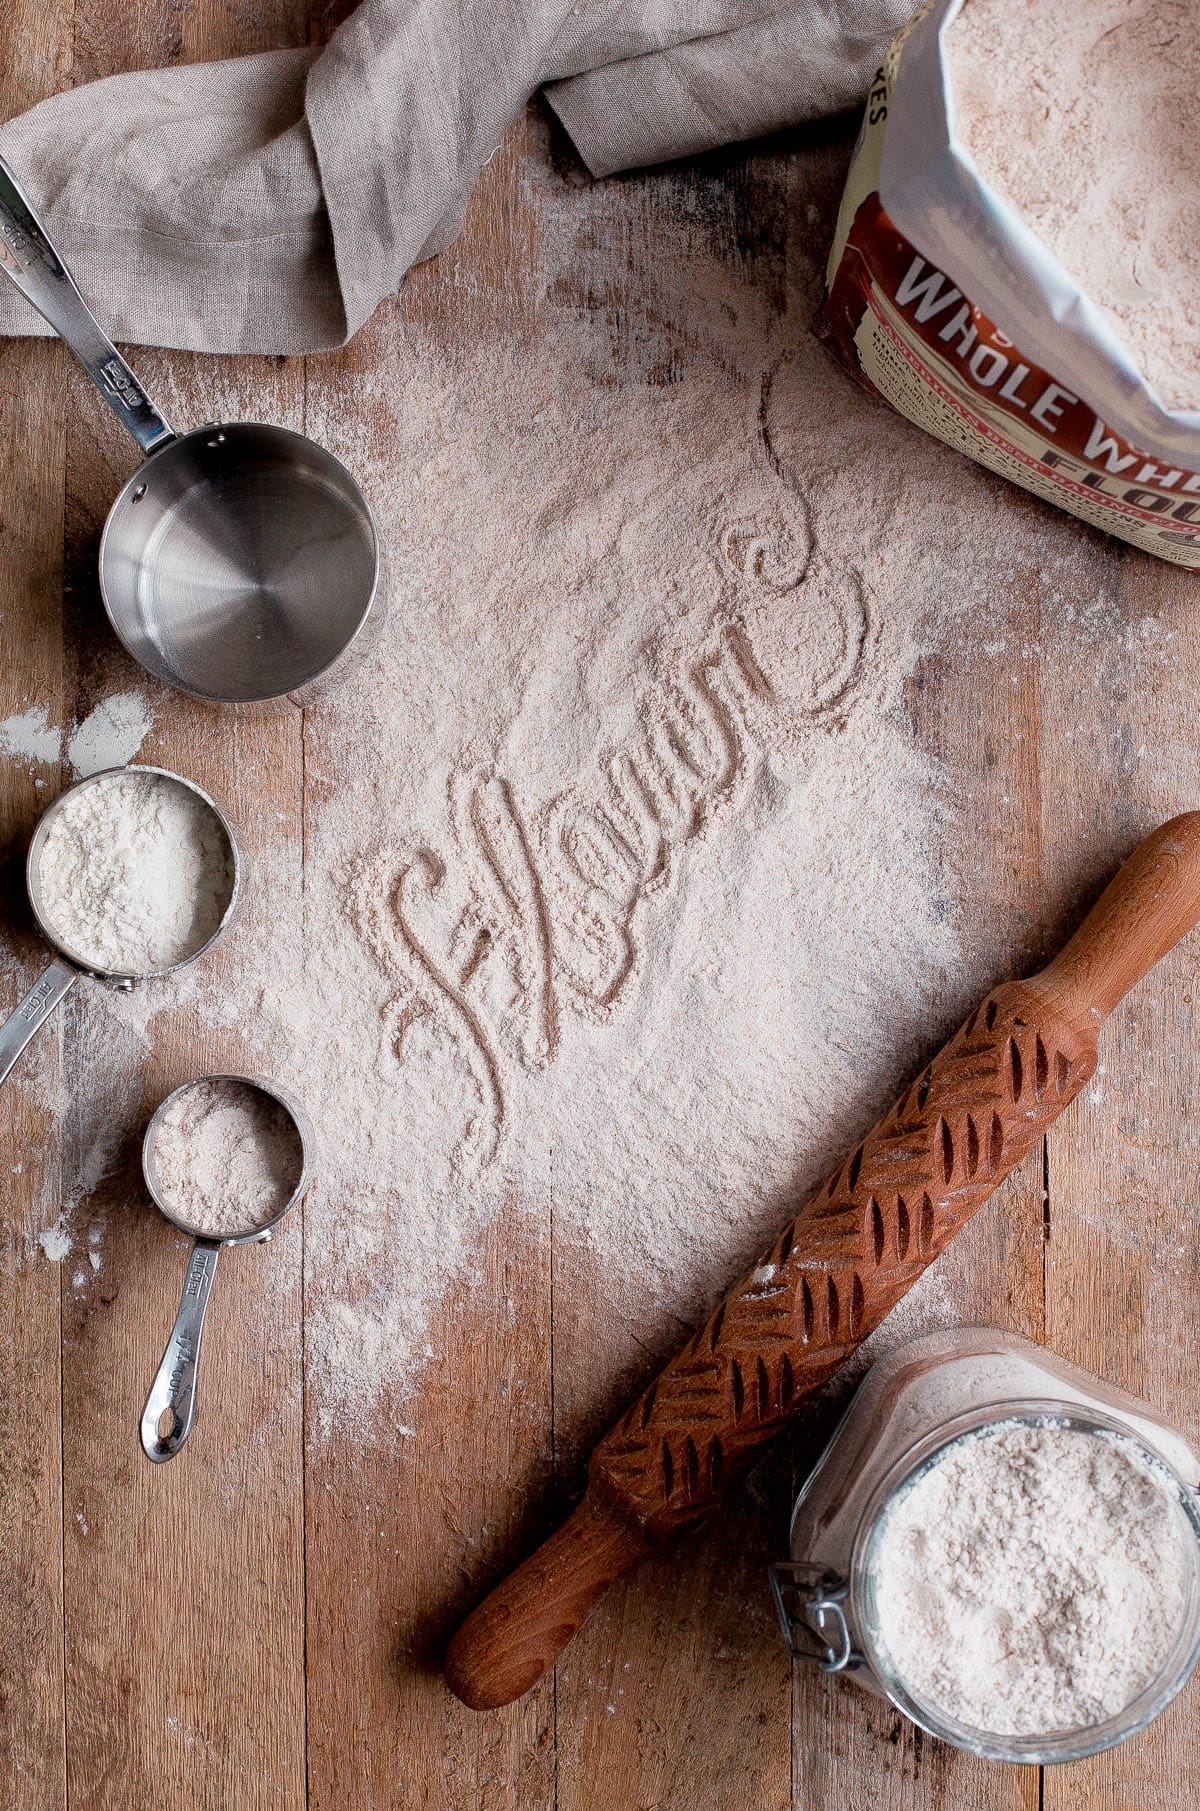 Flour 101 Different Types Of Flour And When To Use Them A Beautiful